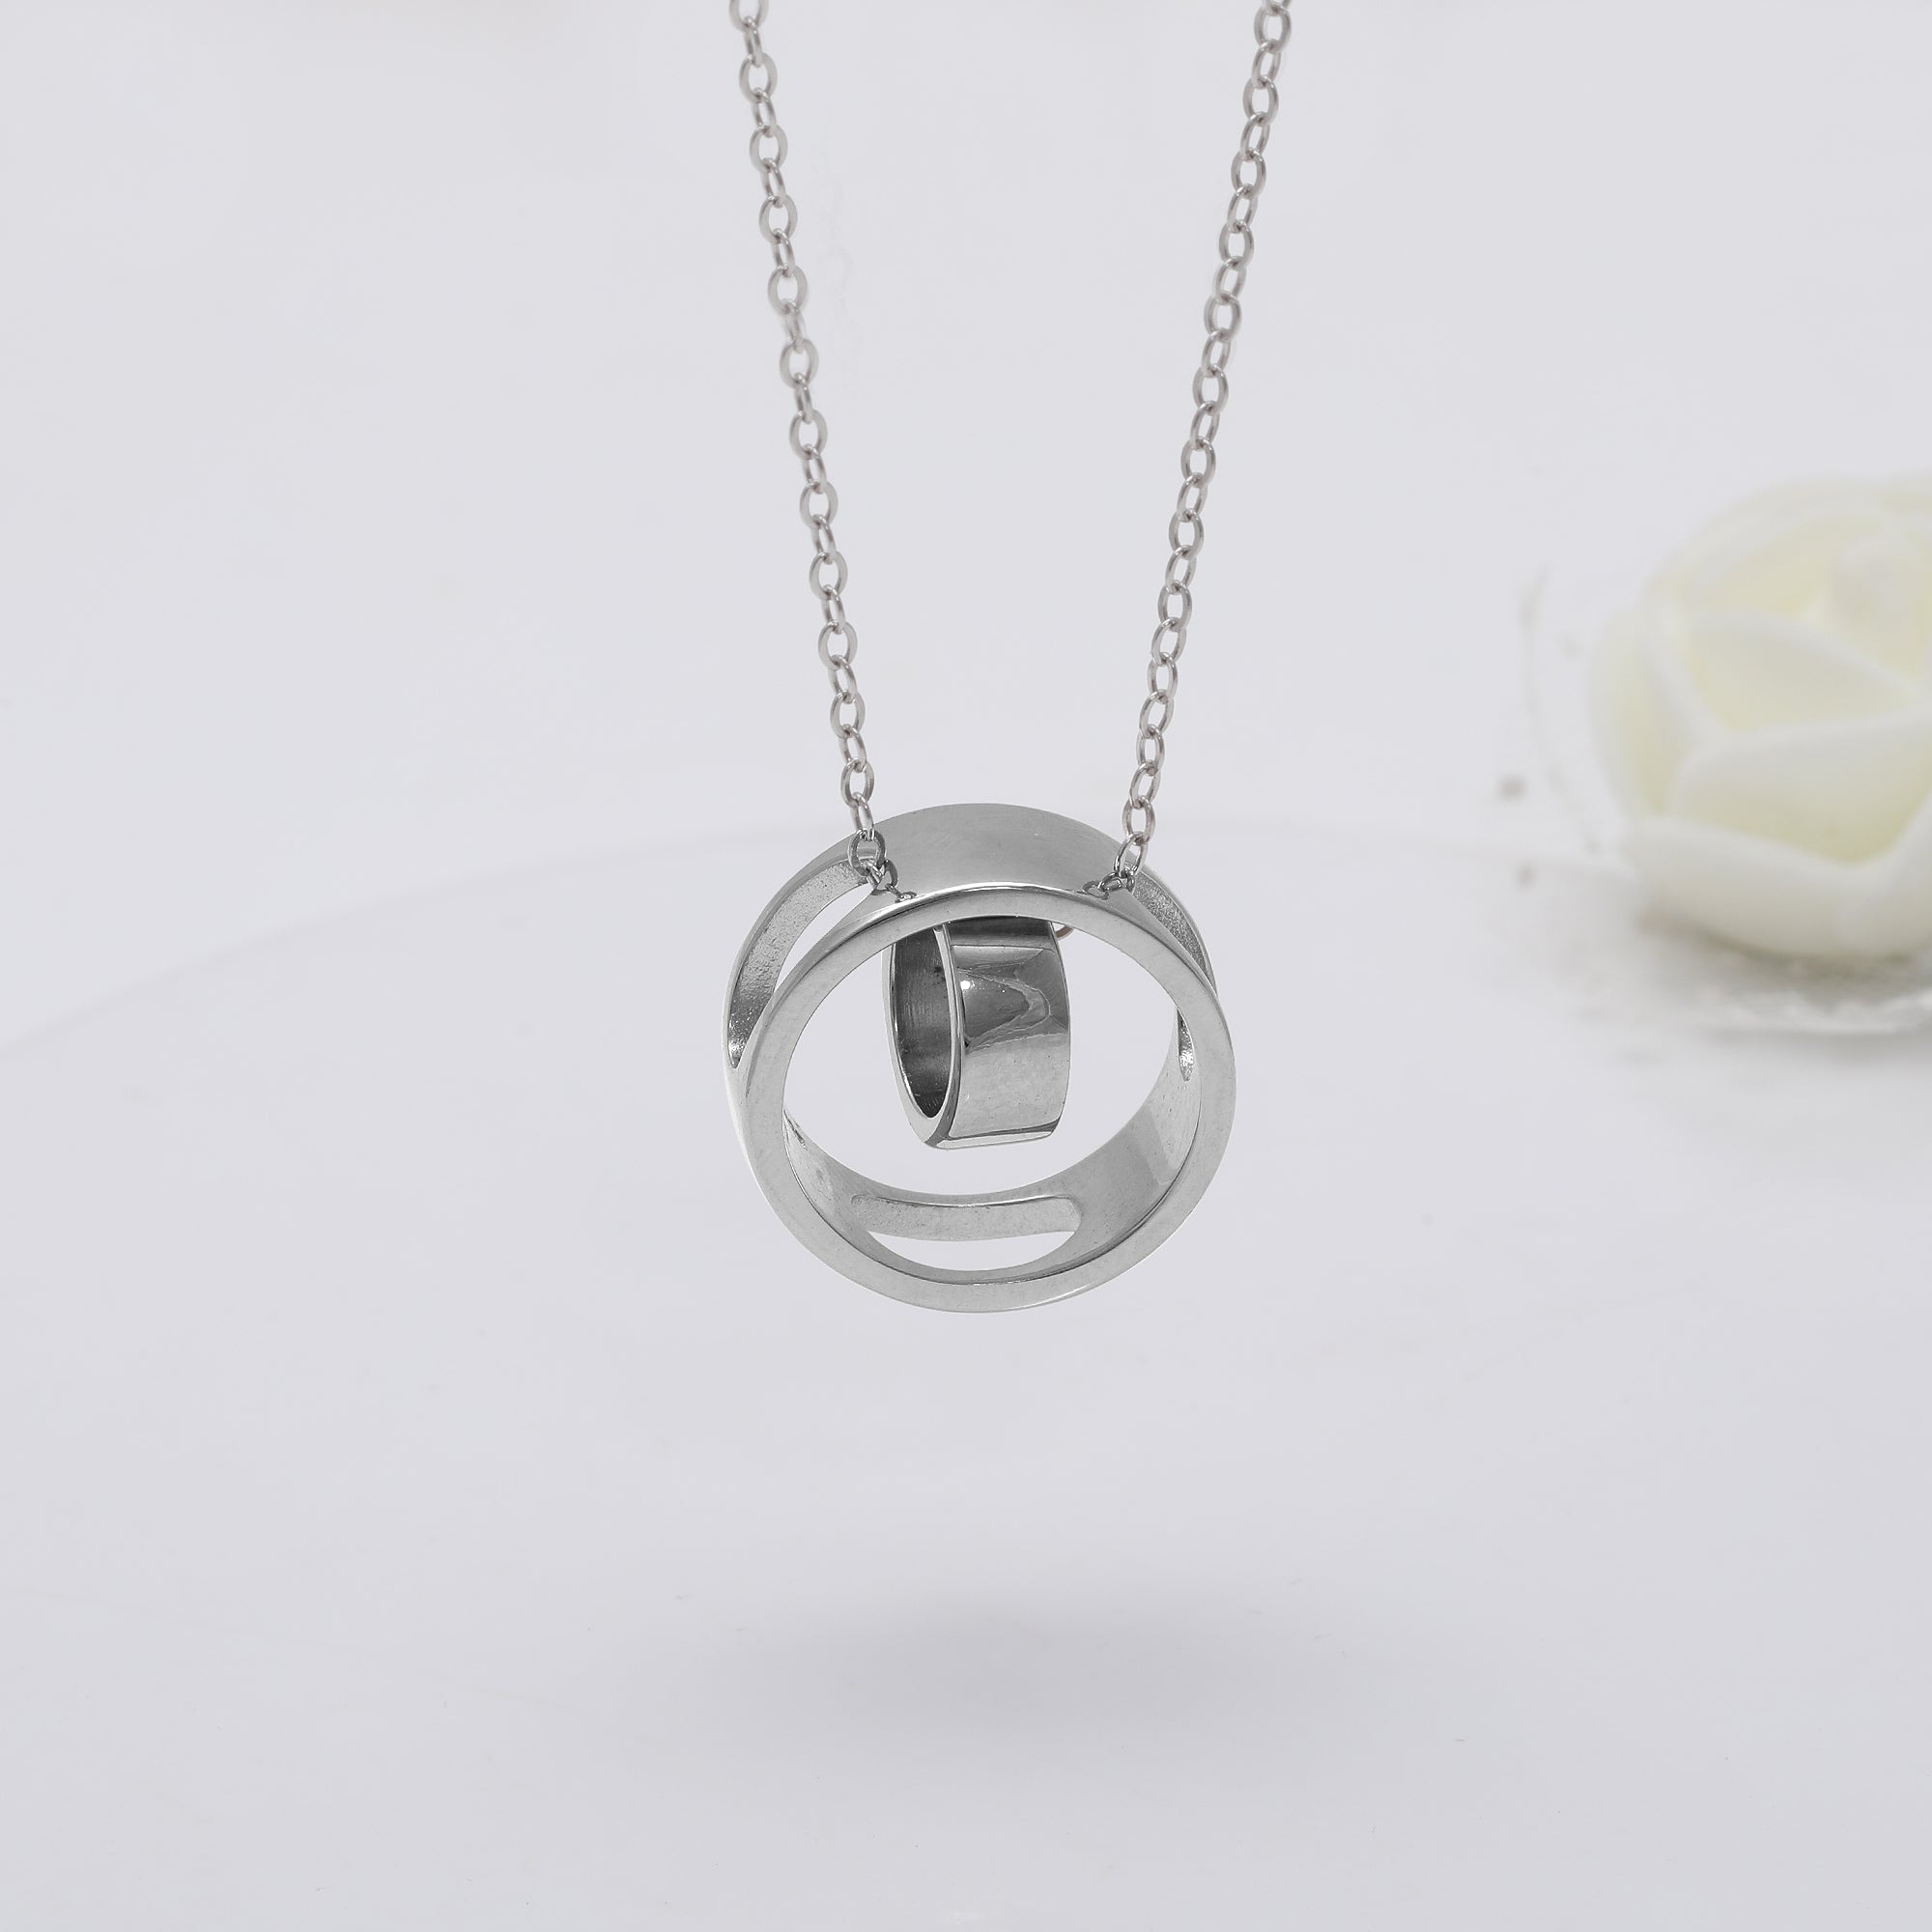 CLARA 925 Sterling Silver Round Pendant Chain Necklace Rhodium Plated,